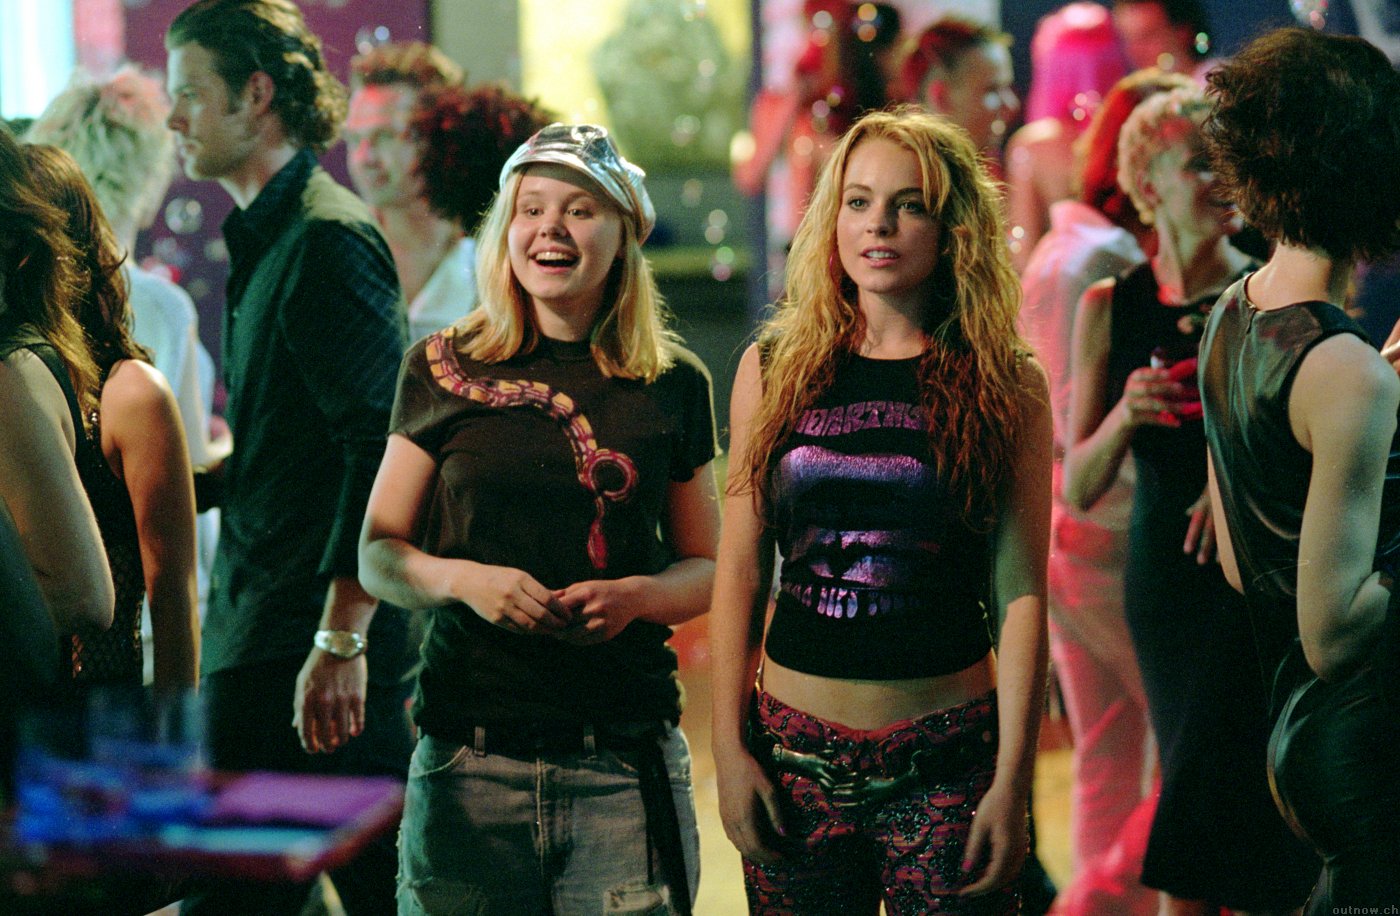 Lindsay Lohan in Confessions of a Teenage Drama Queen